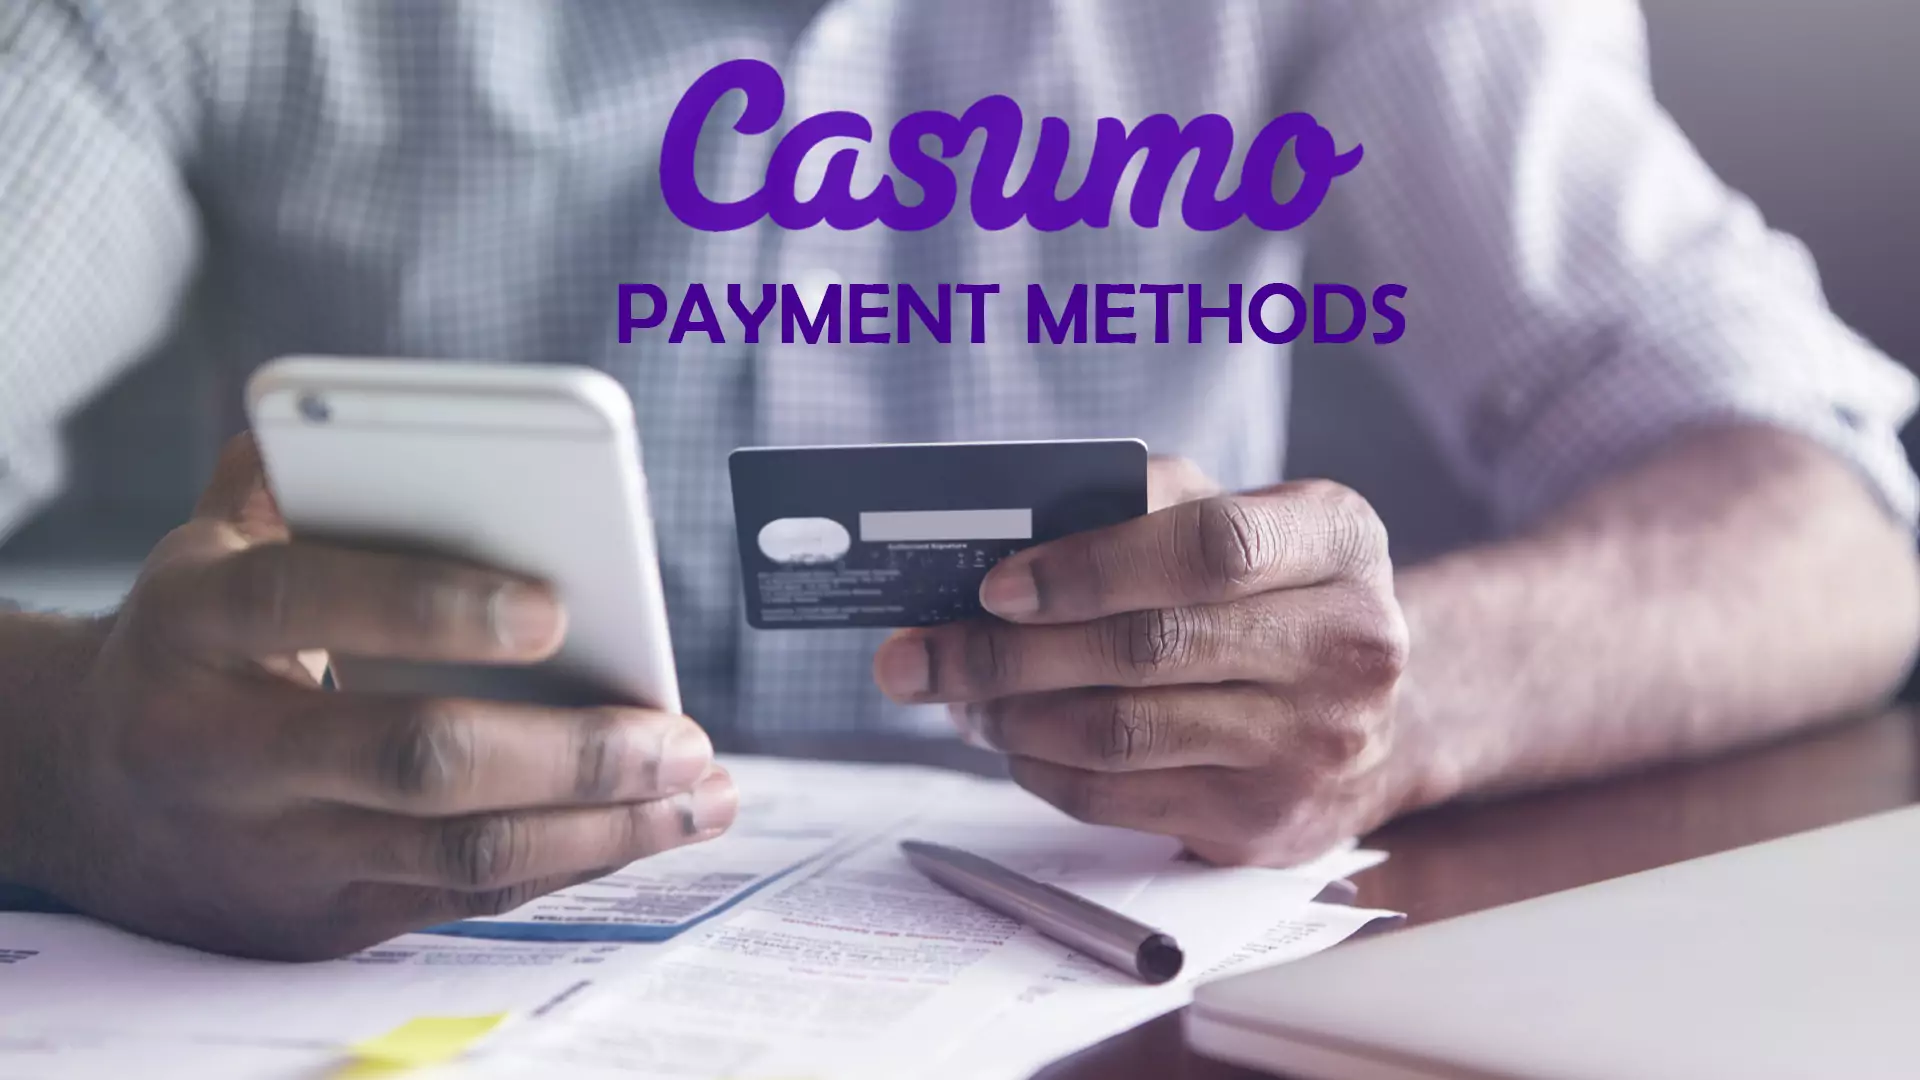 Casumo accepts deposits made with all of the popular payment methods.